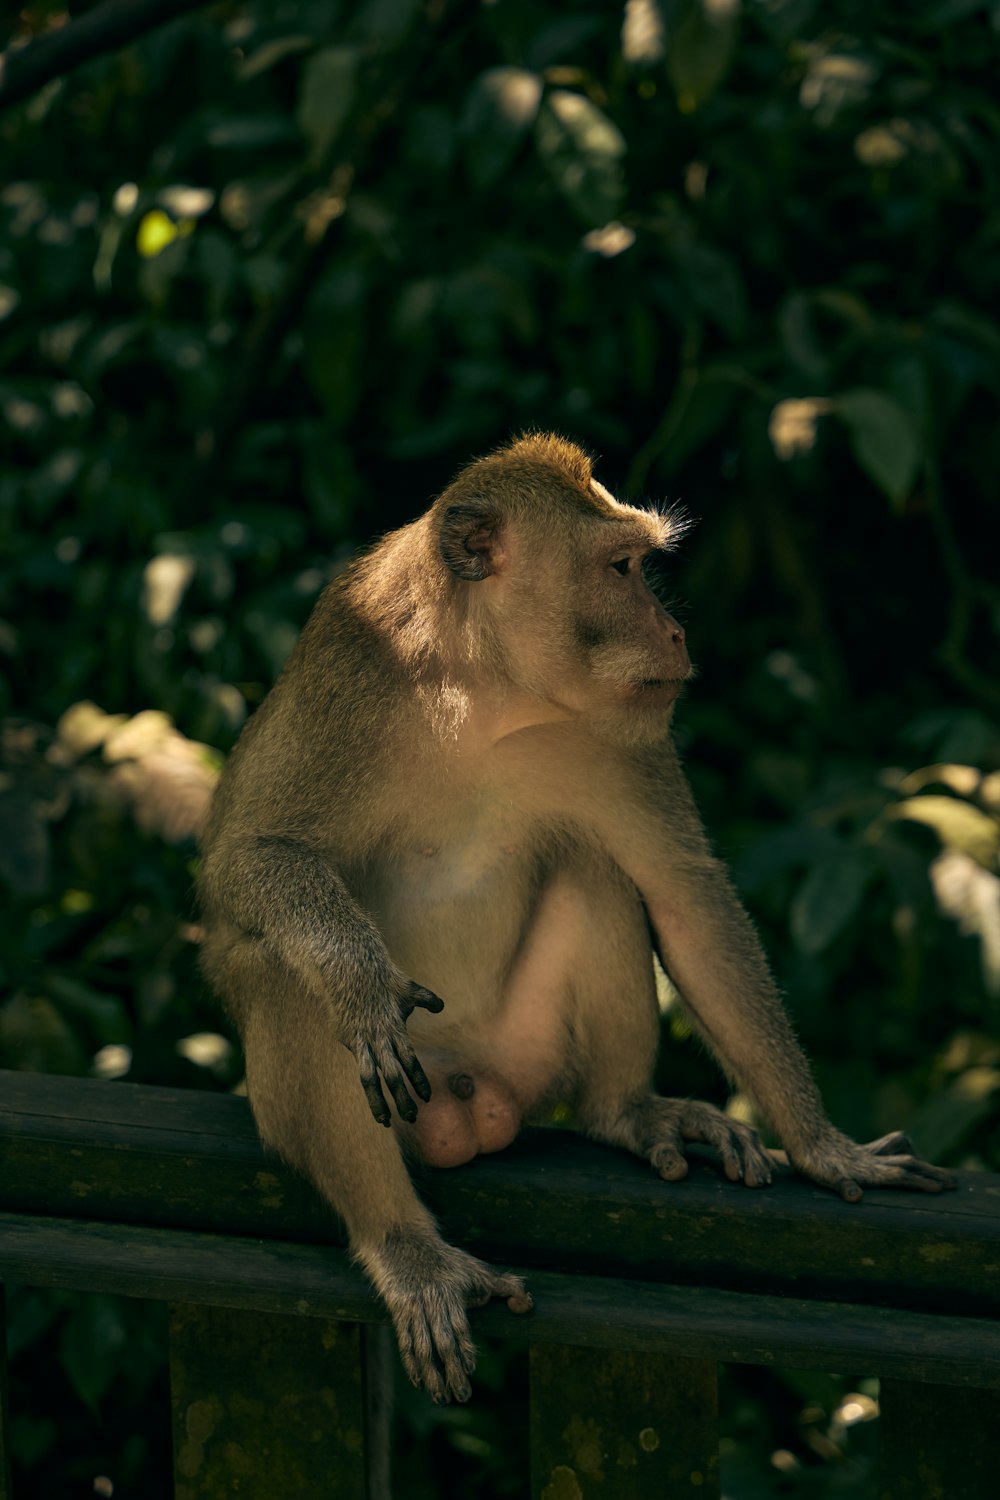 a small monkey sitting on a wooden rail